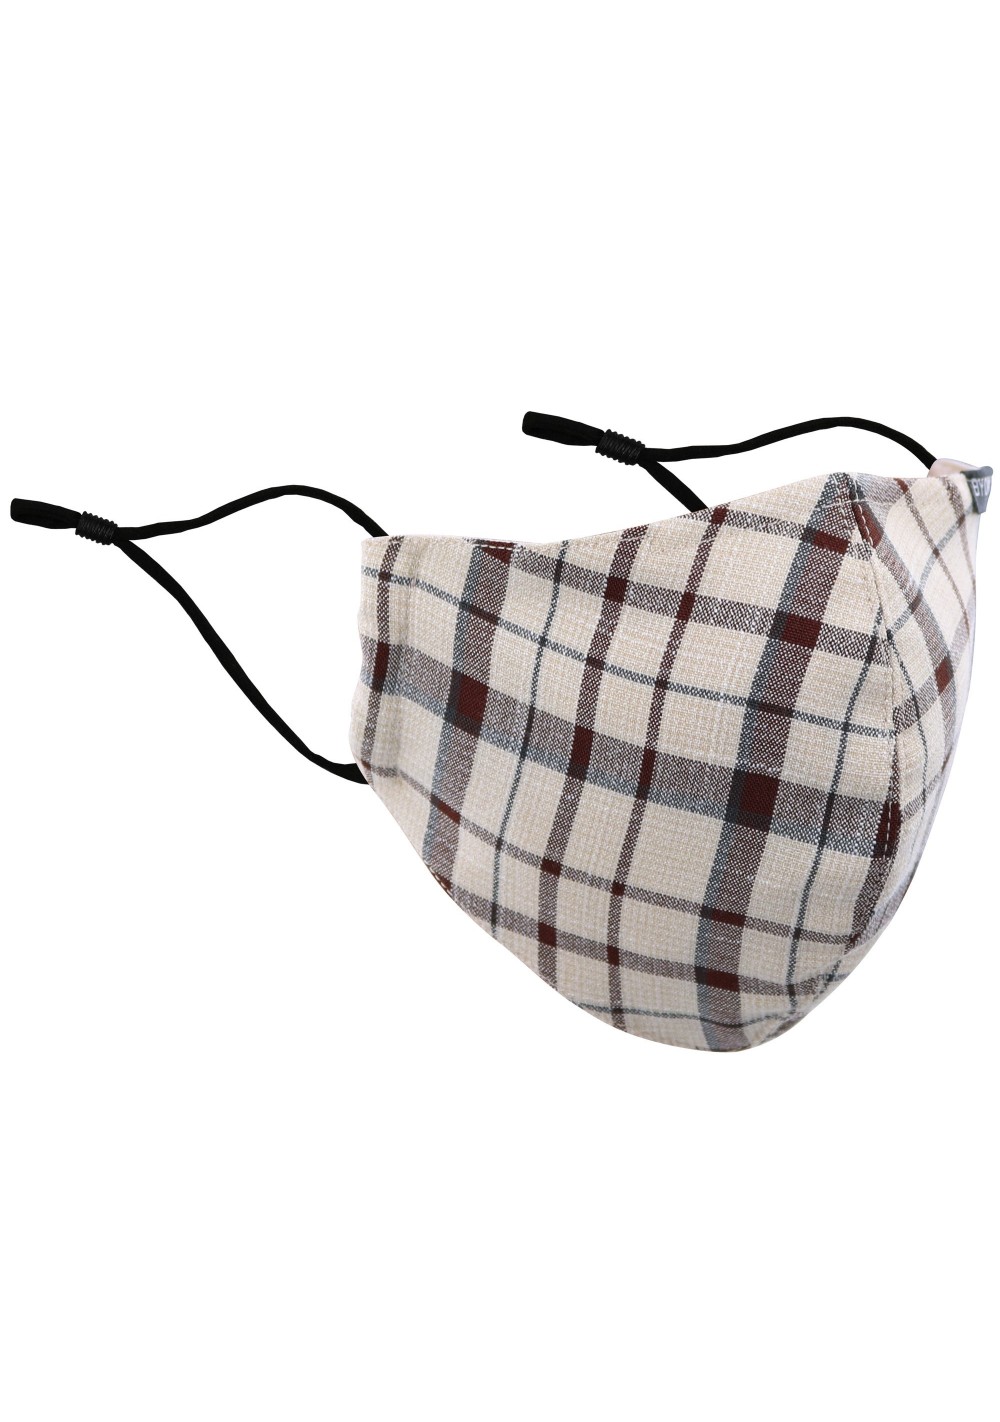 Adjustable Filter Face Mask in Fall Plaid